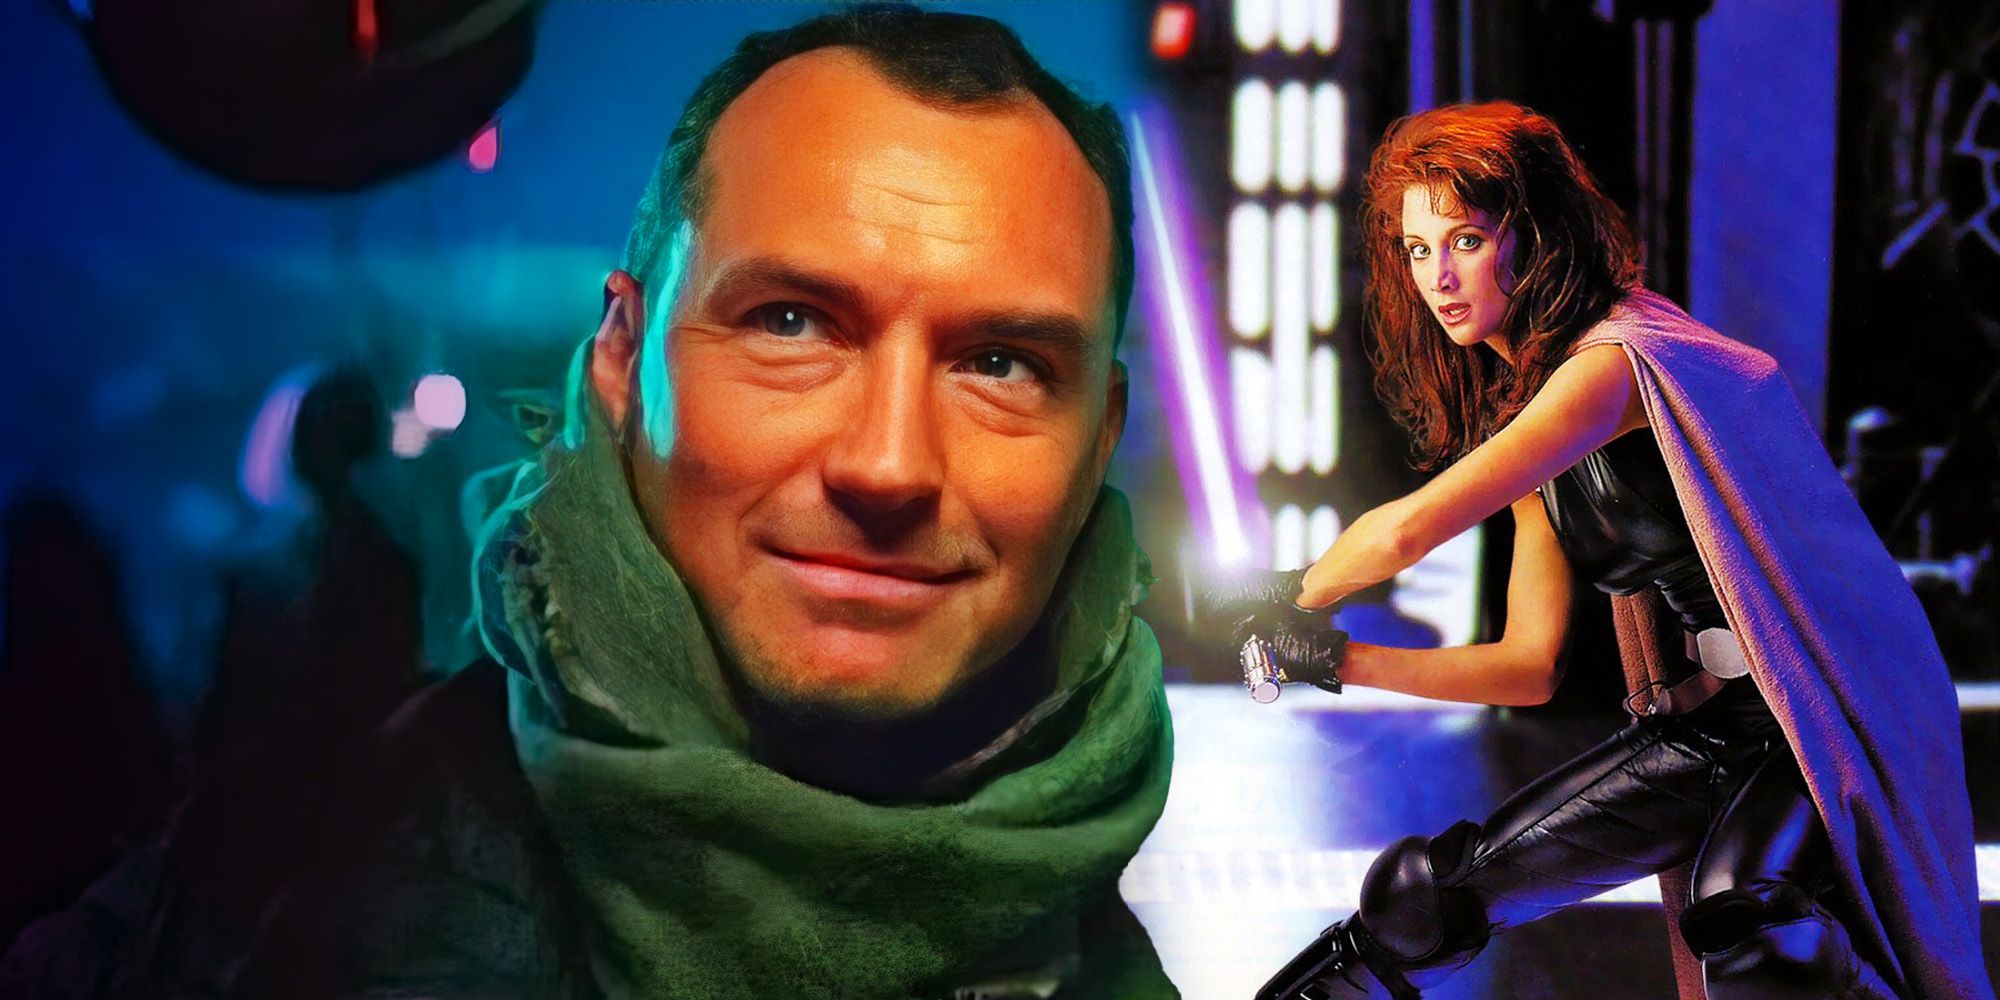 Jude Law from Skeleton Crew promos and Mara Jade from Star Wars Legends